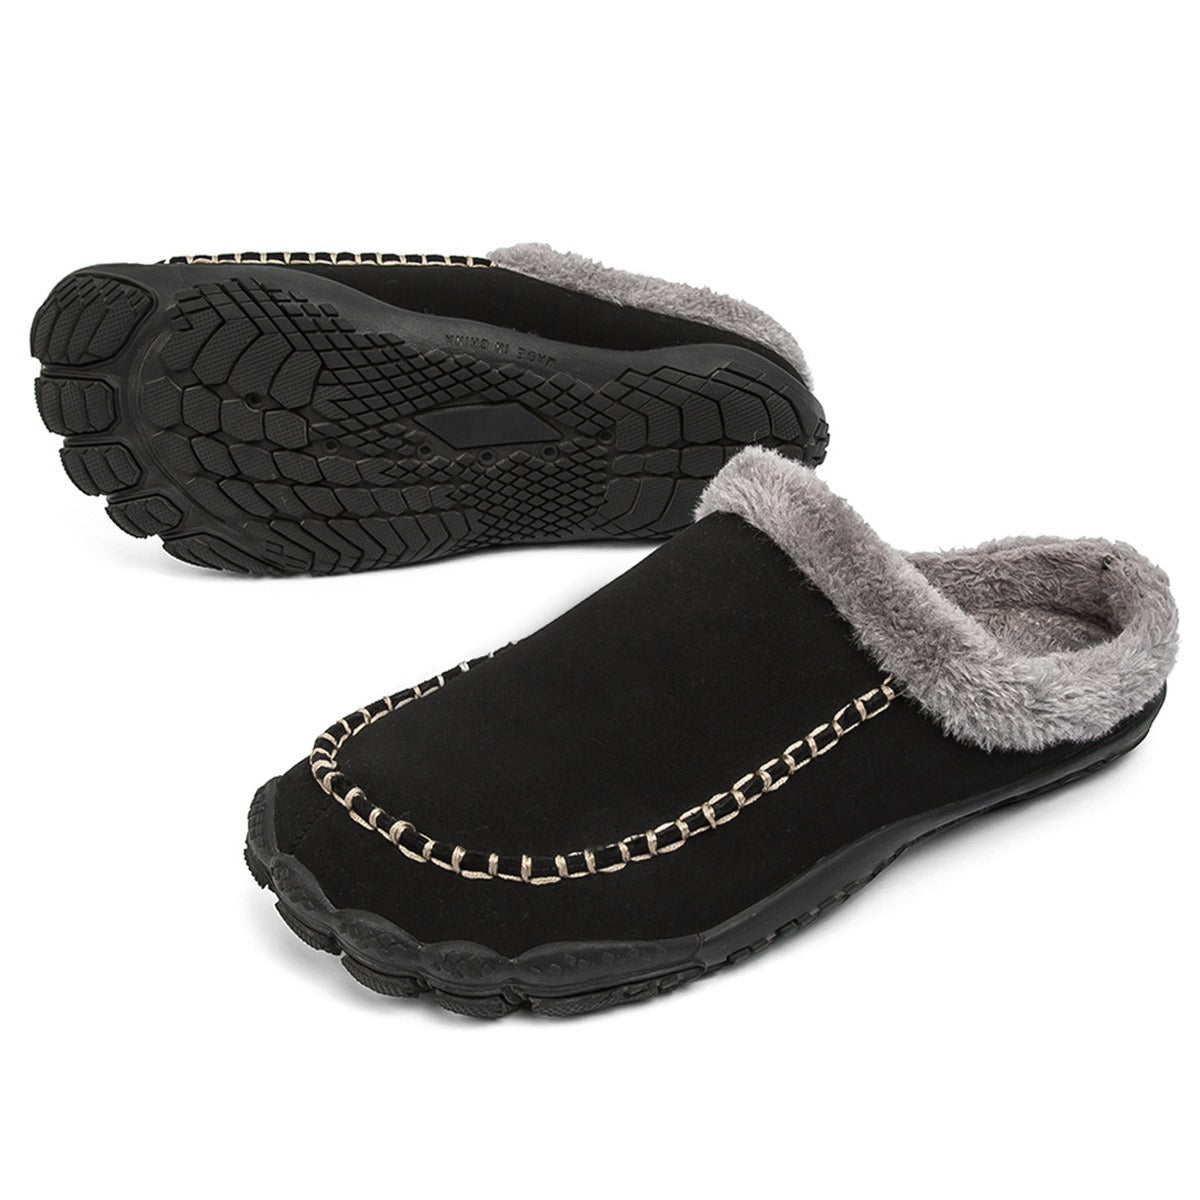 Cotton slippers for men in autumn and winter, indoor leisure, fitness, and sports shoes